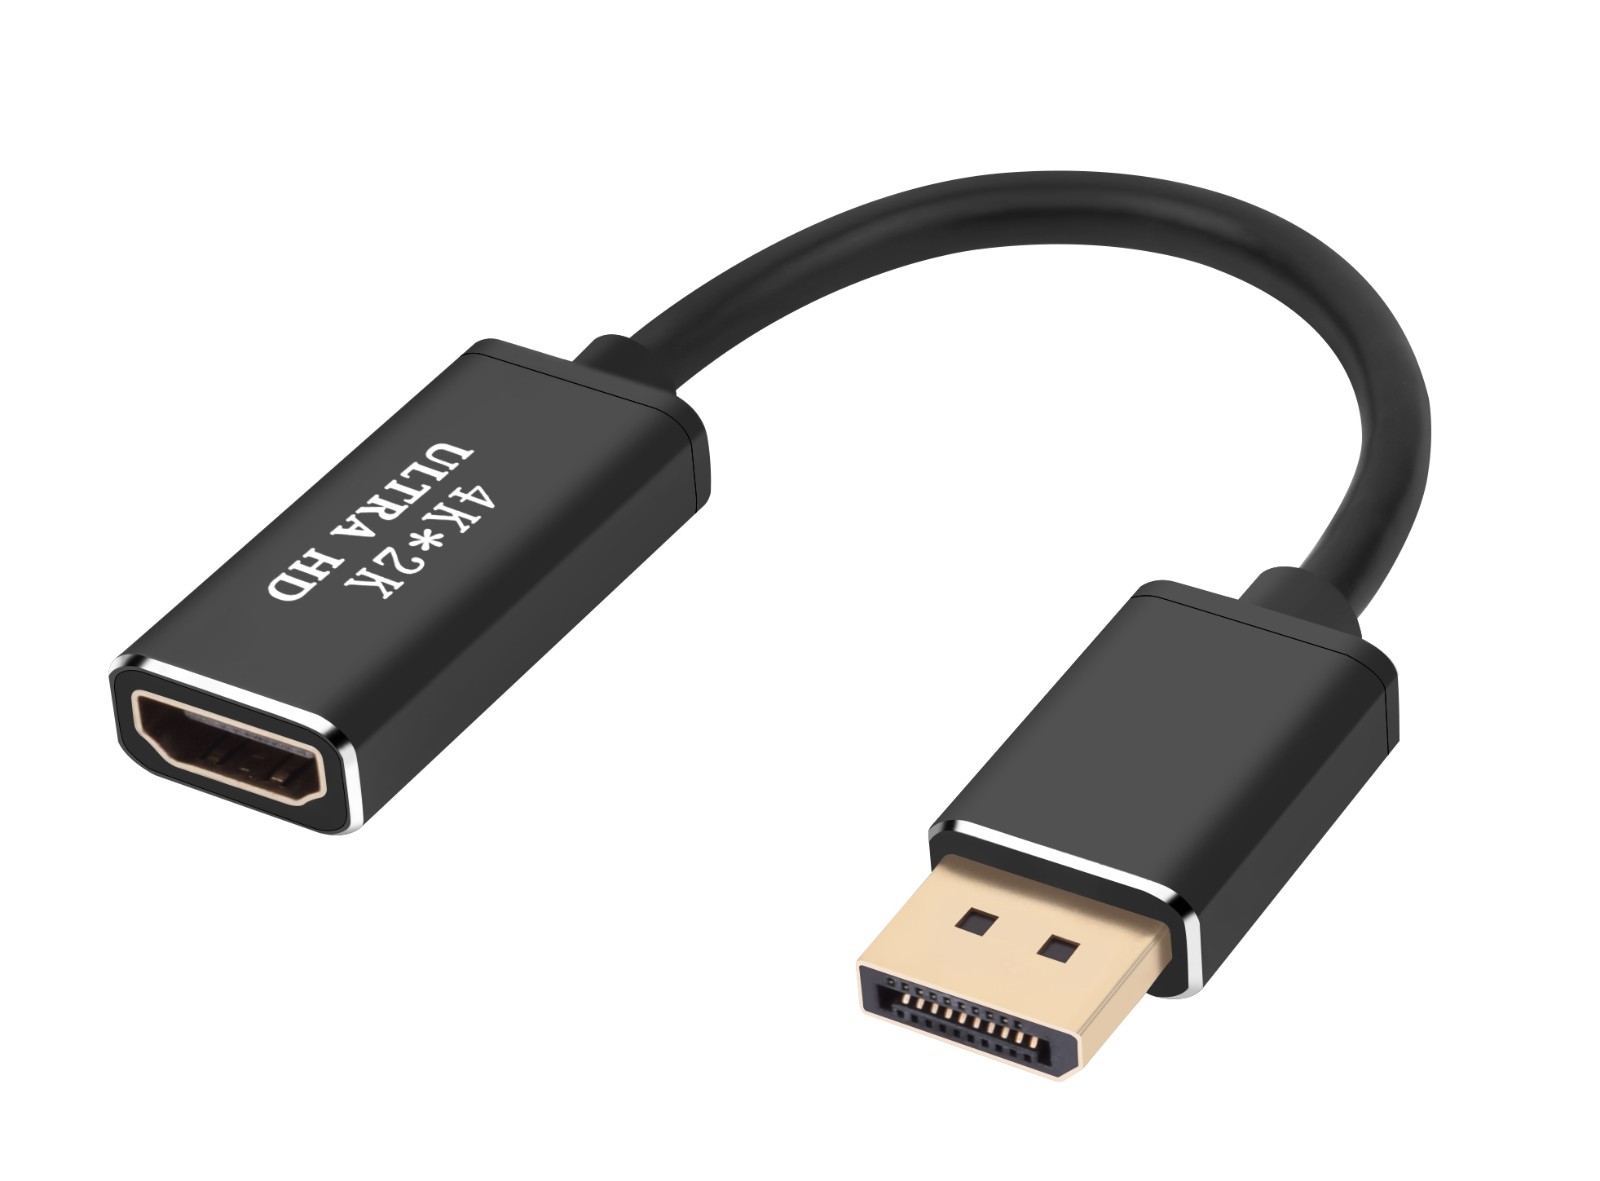 4K Displayport to HDMI Aluminum housing adapter cable